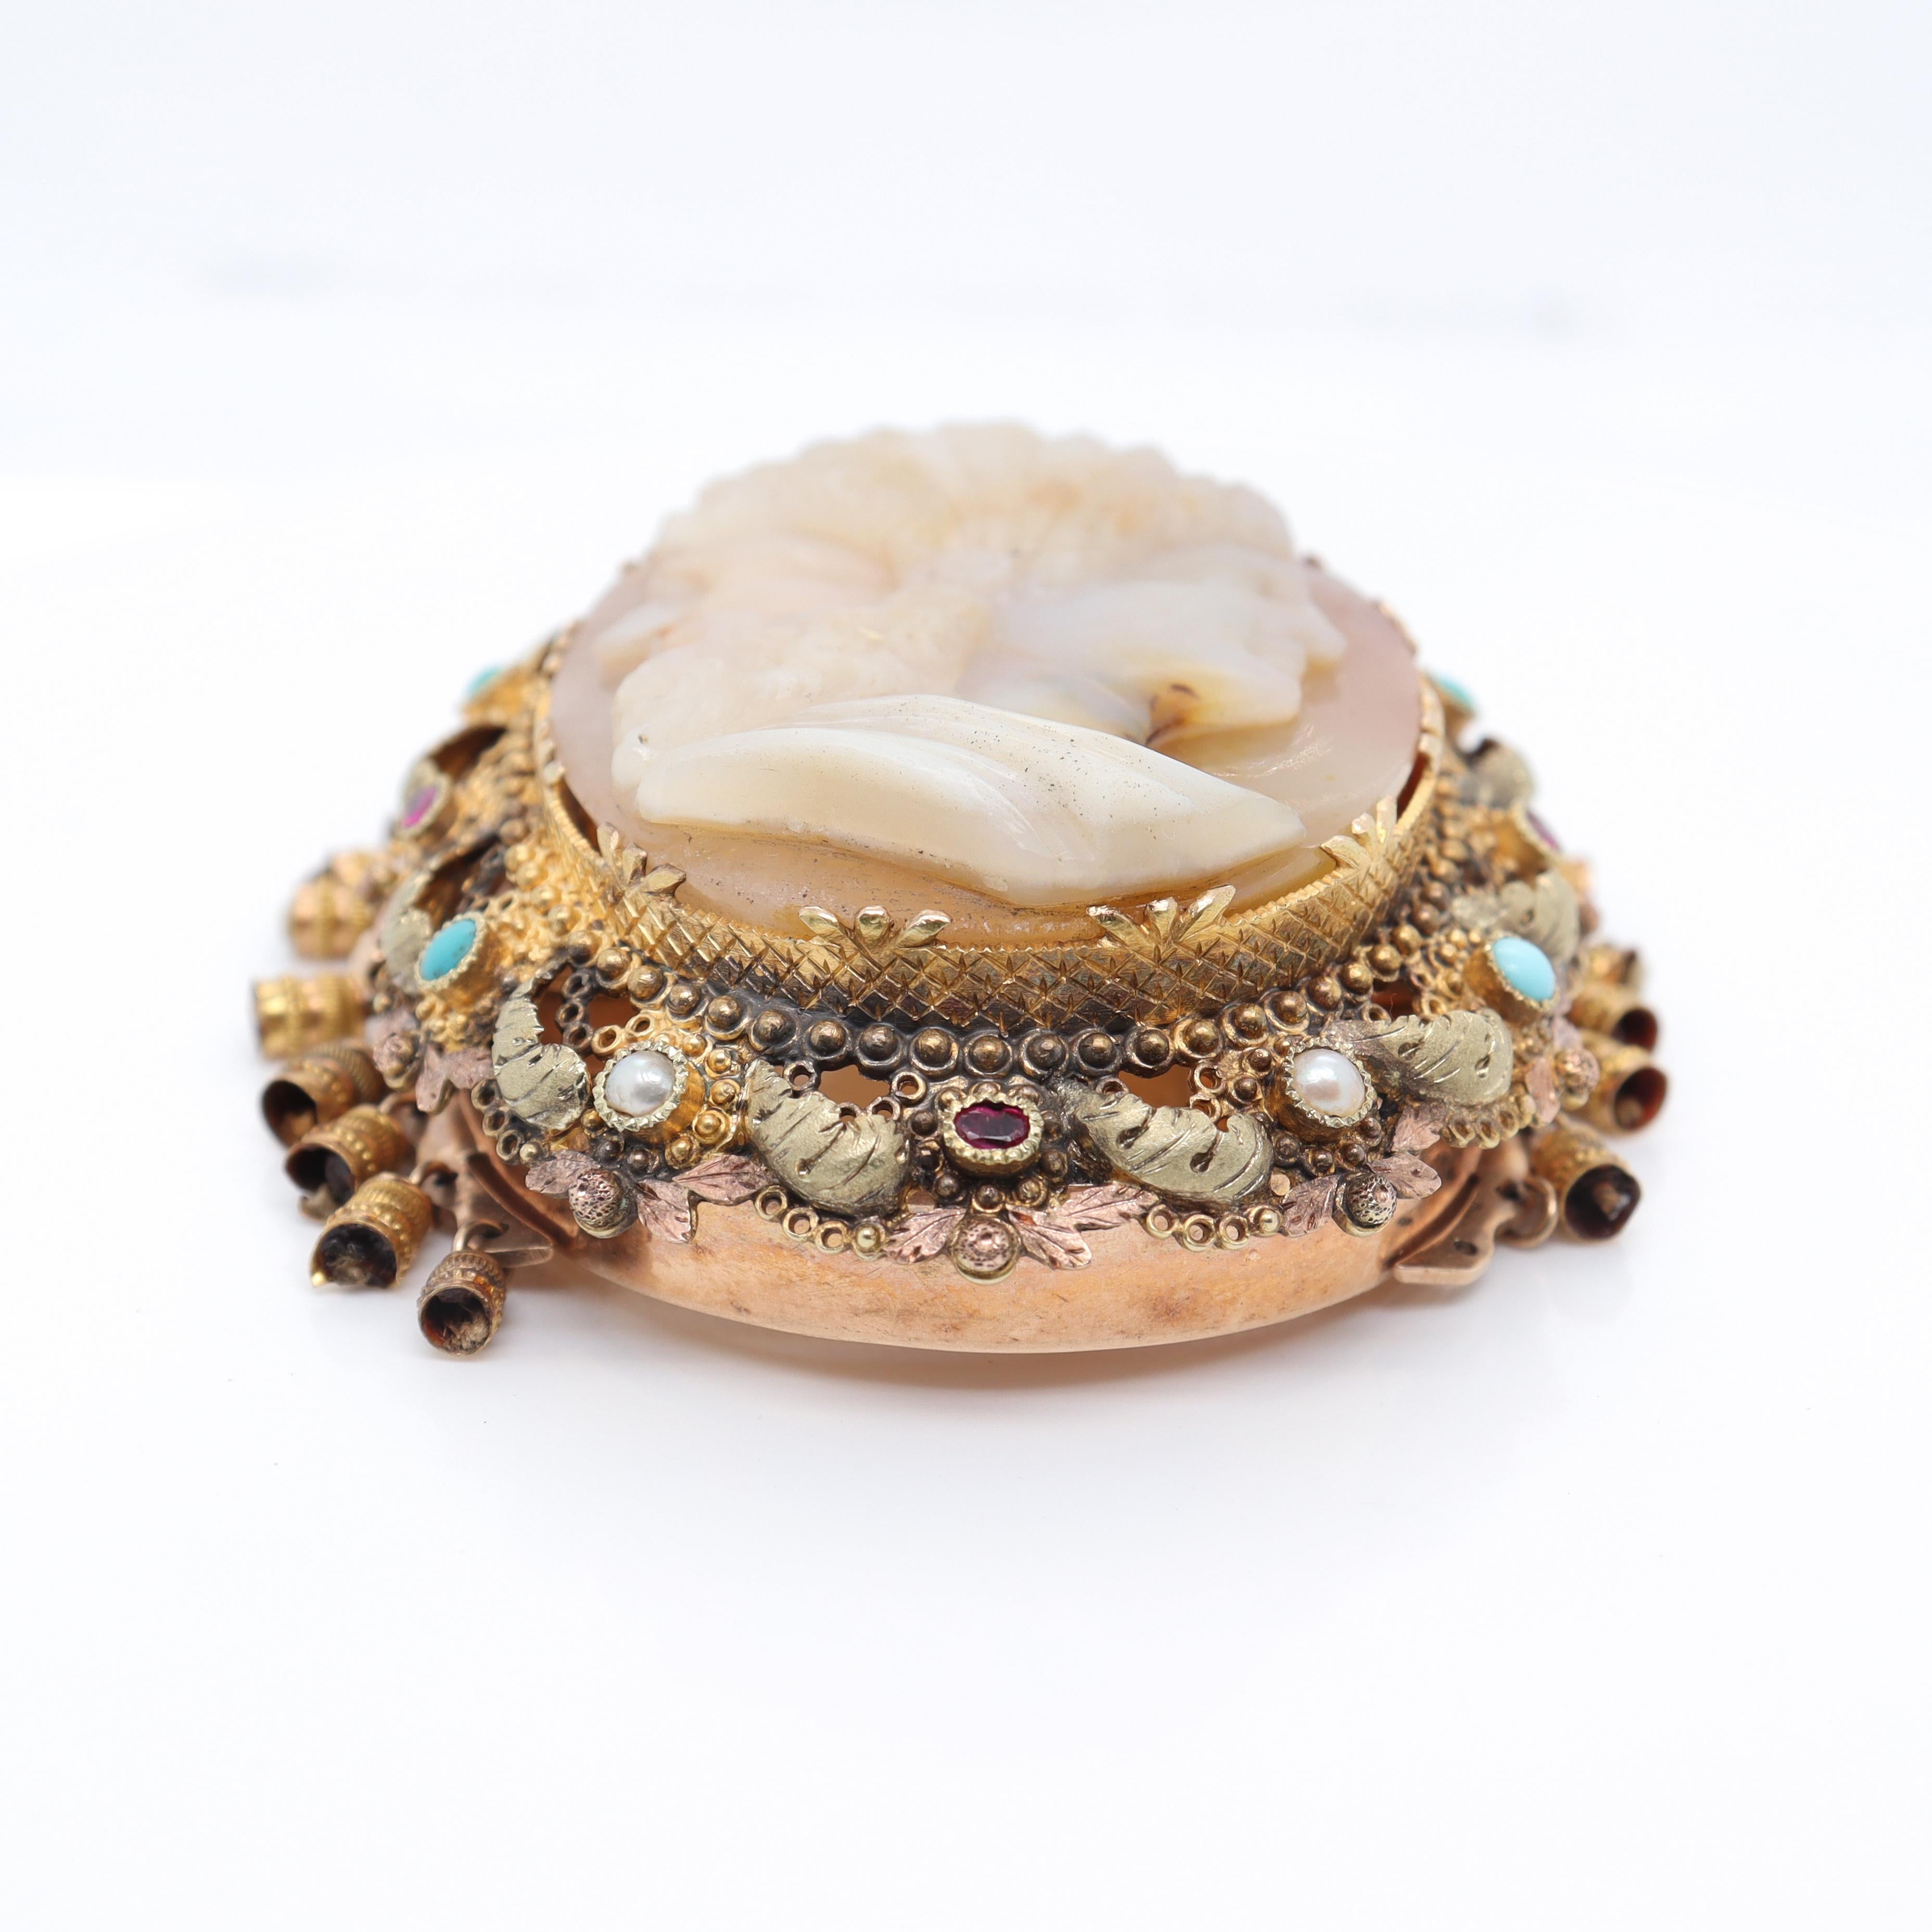 Antique Gold & Carved Agate Cameo Hermaphrodite Bracelet or Necklace Clasp In Good Condition For Sale In Philadelphia, PA